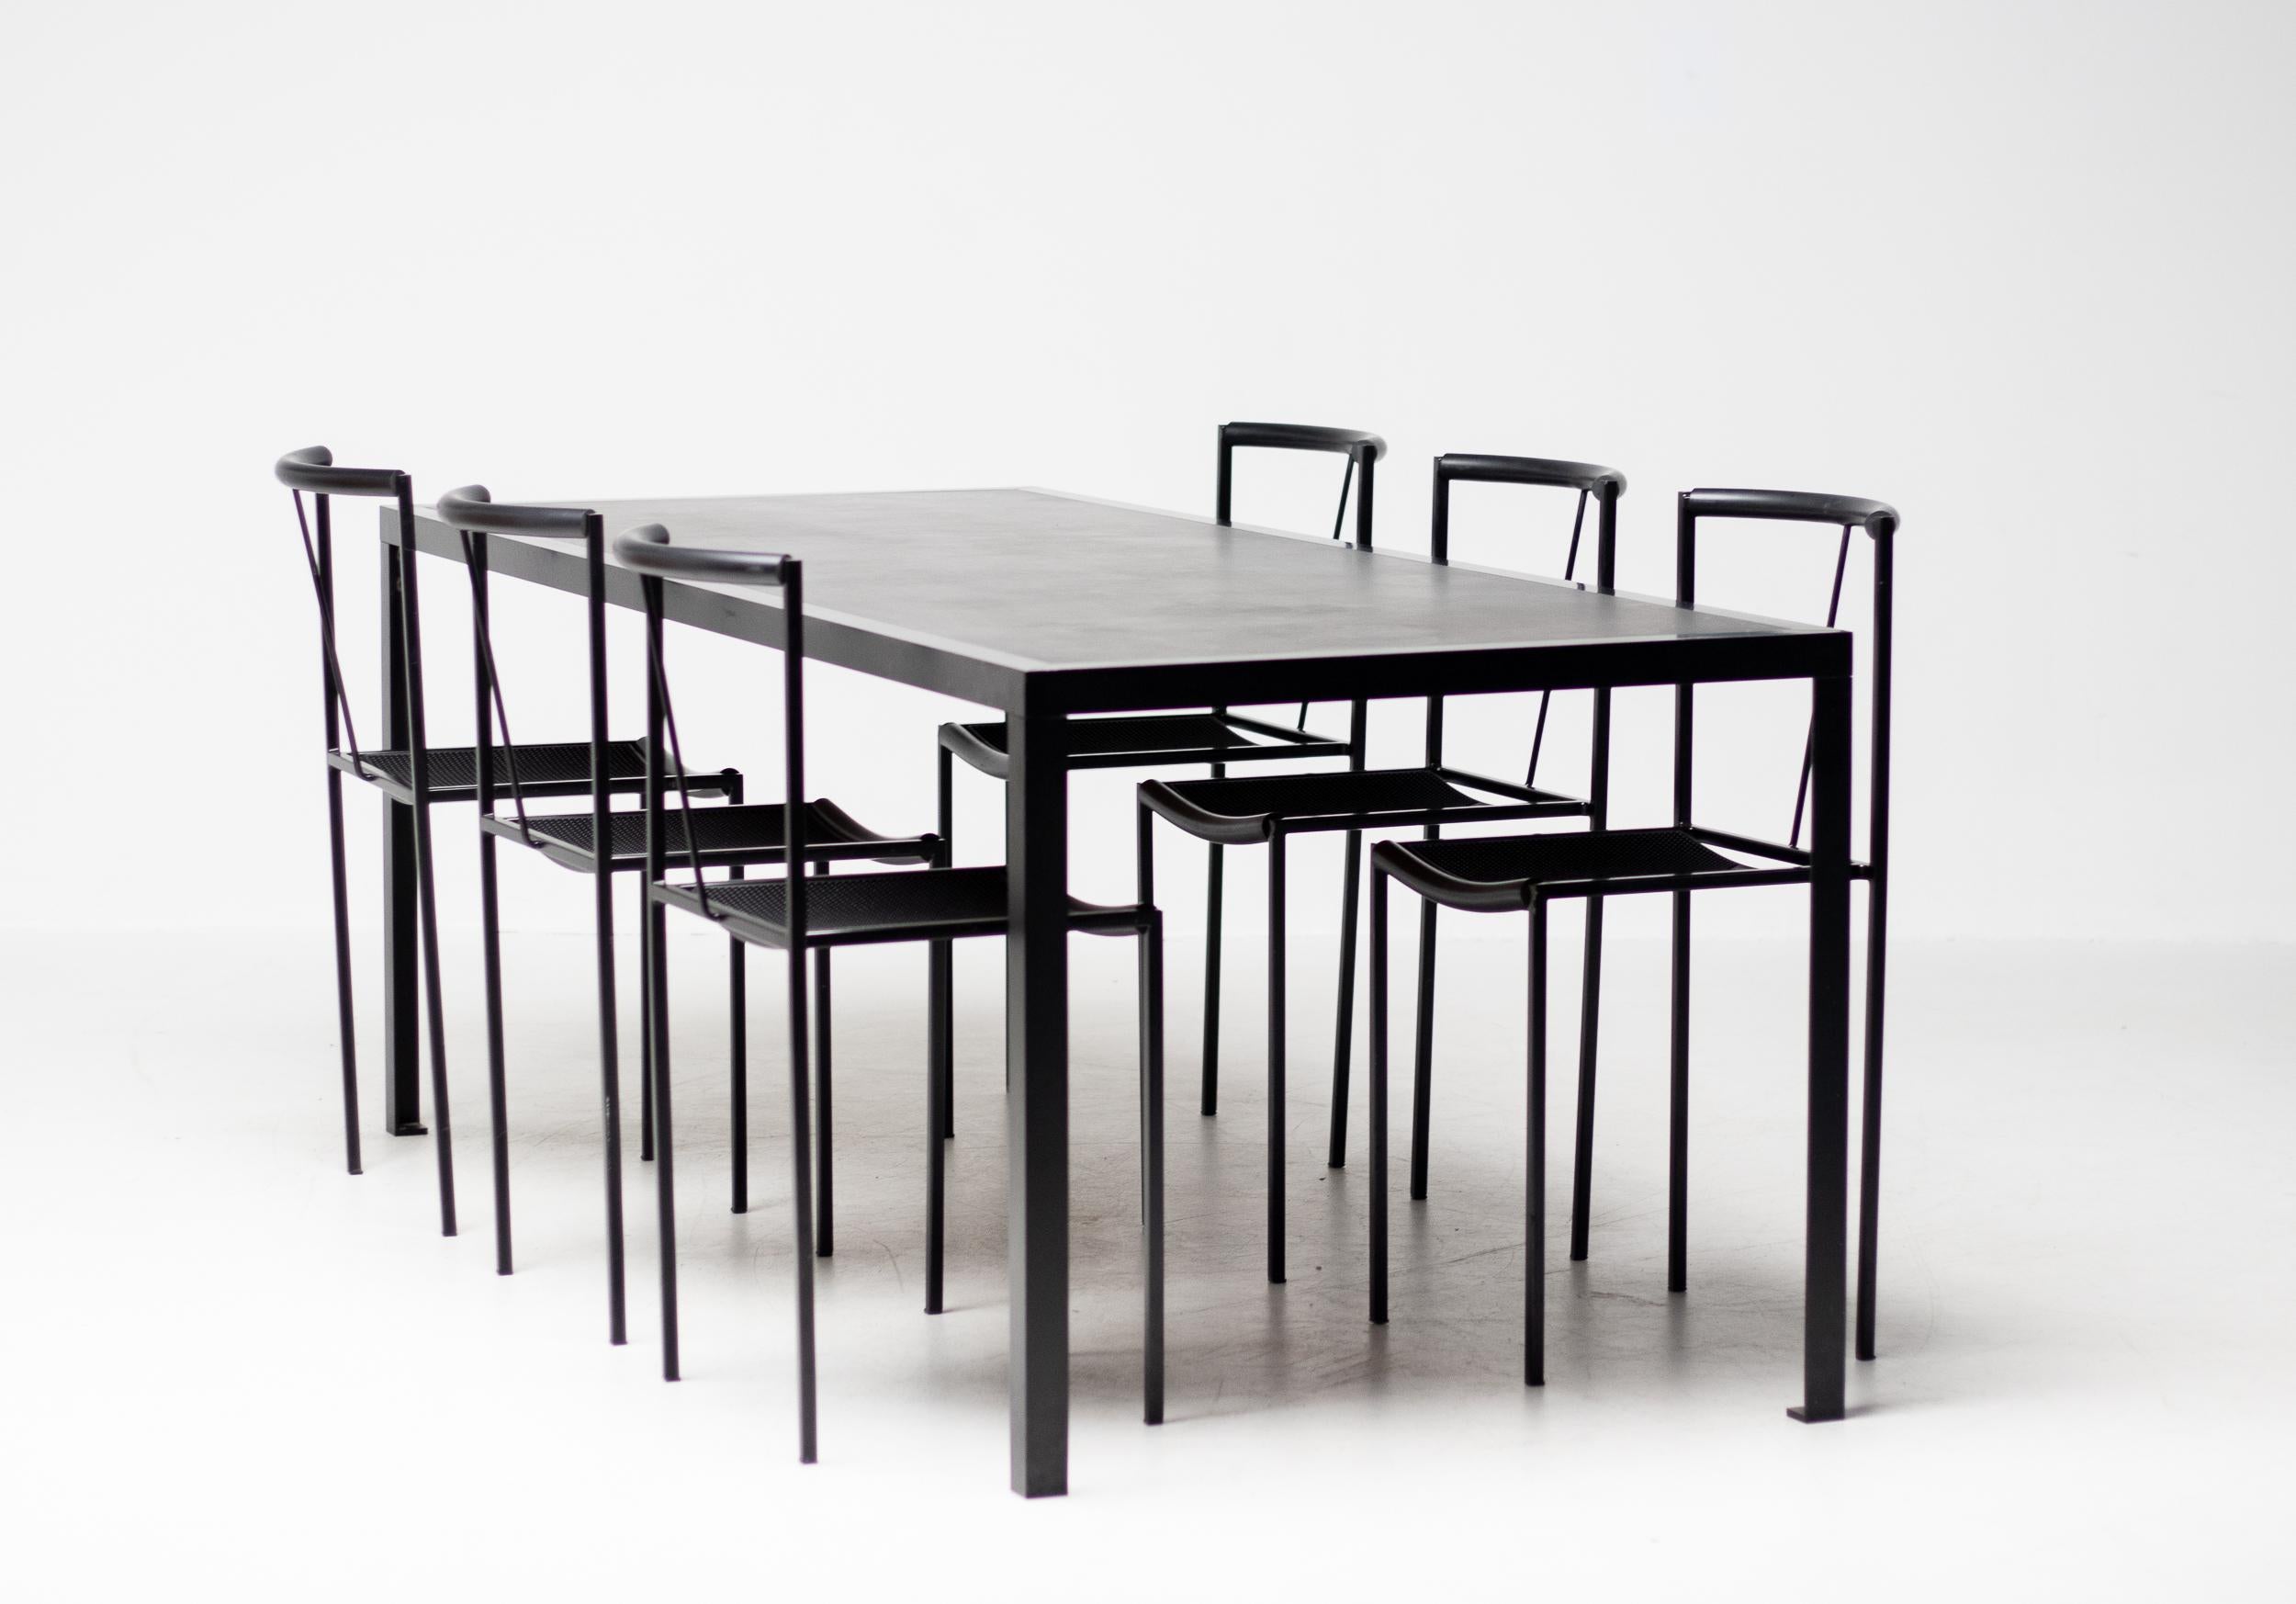 Set of Six Poltroncina Chairs by Maurizio Peregalli 1